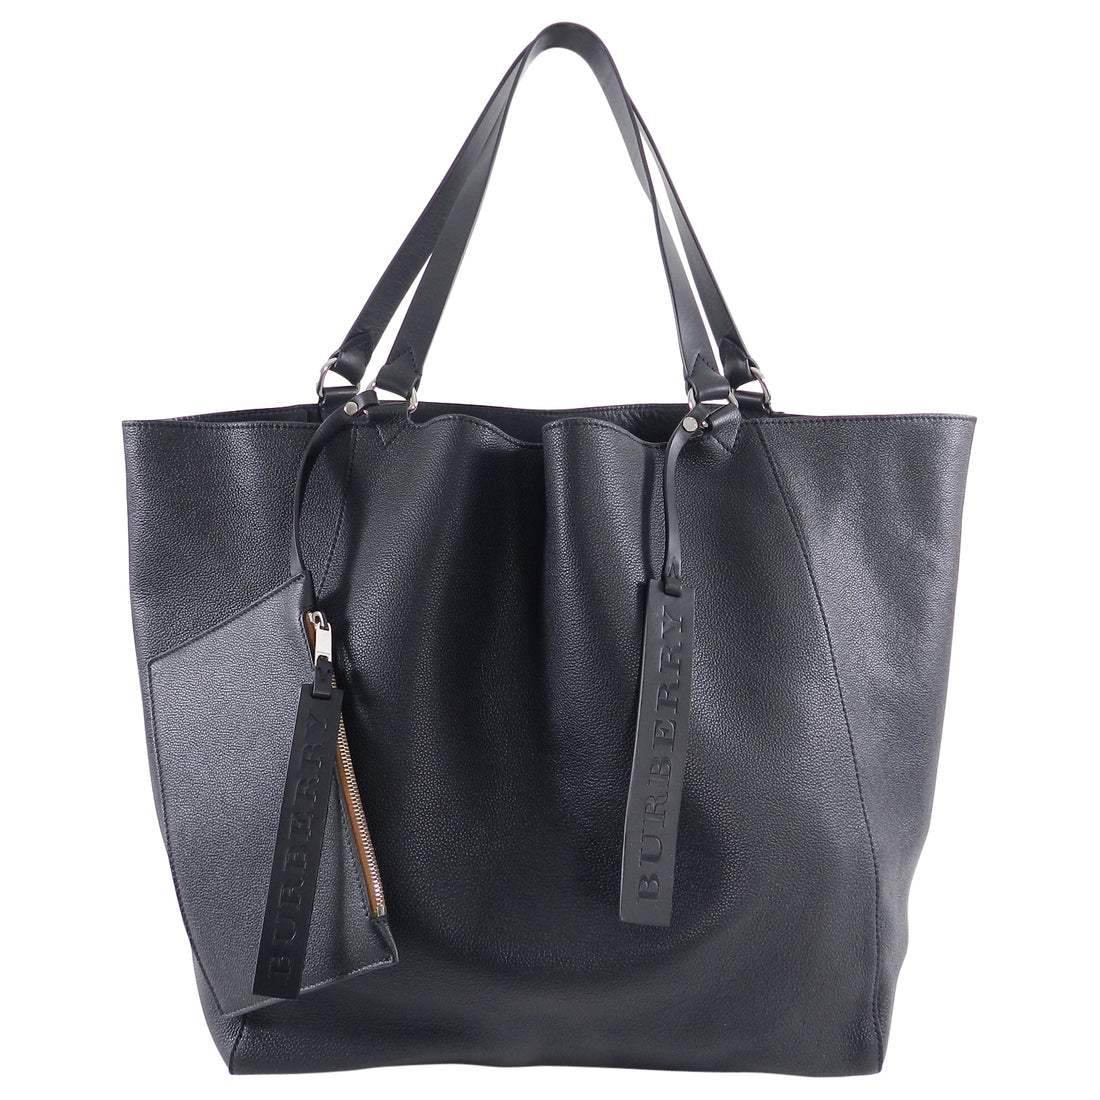 Burberry Extra Large Black Floppy Grained Leather Tote Bag